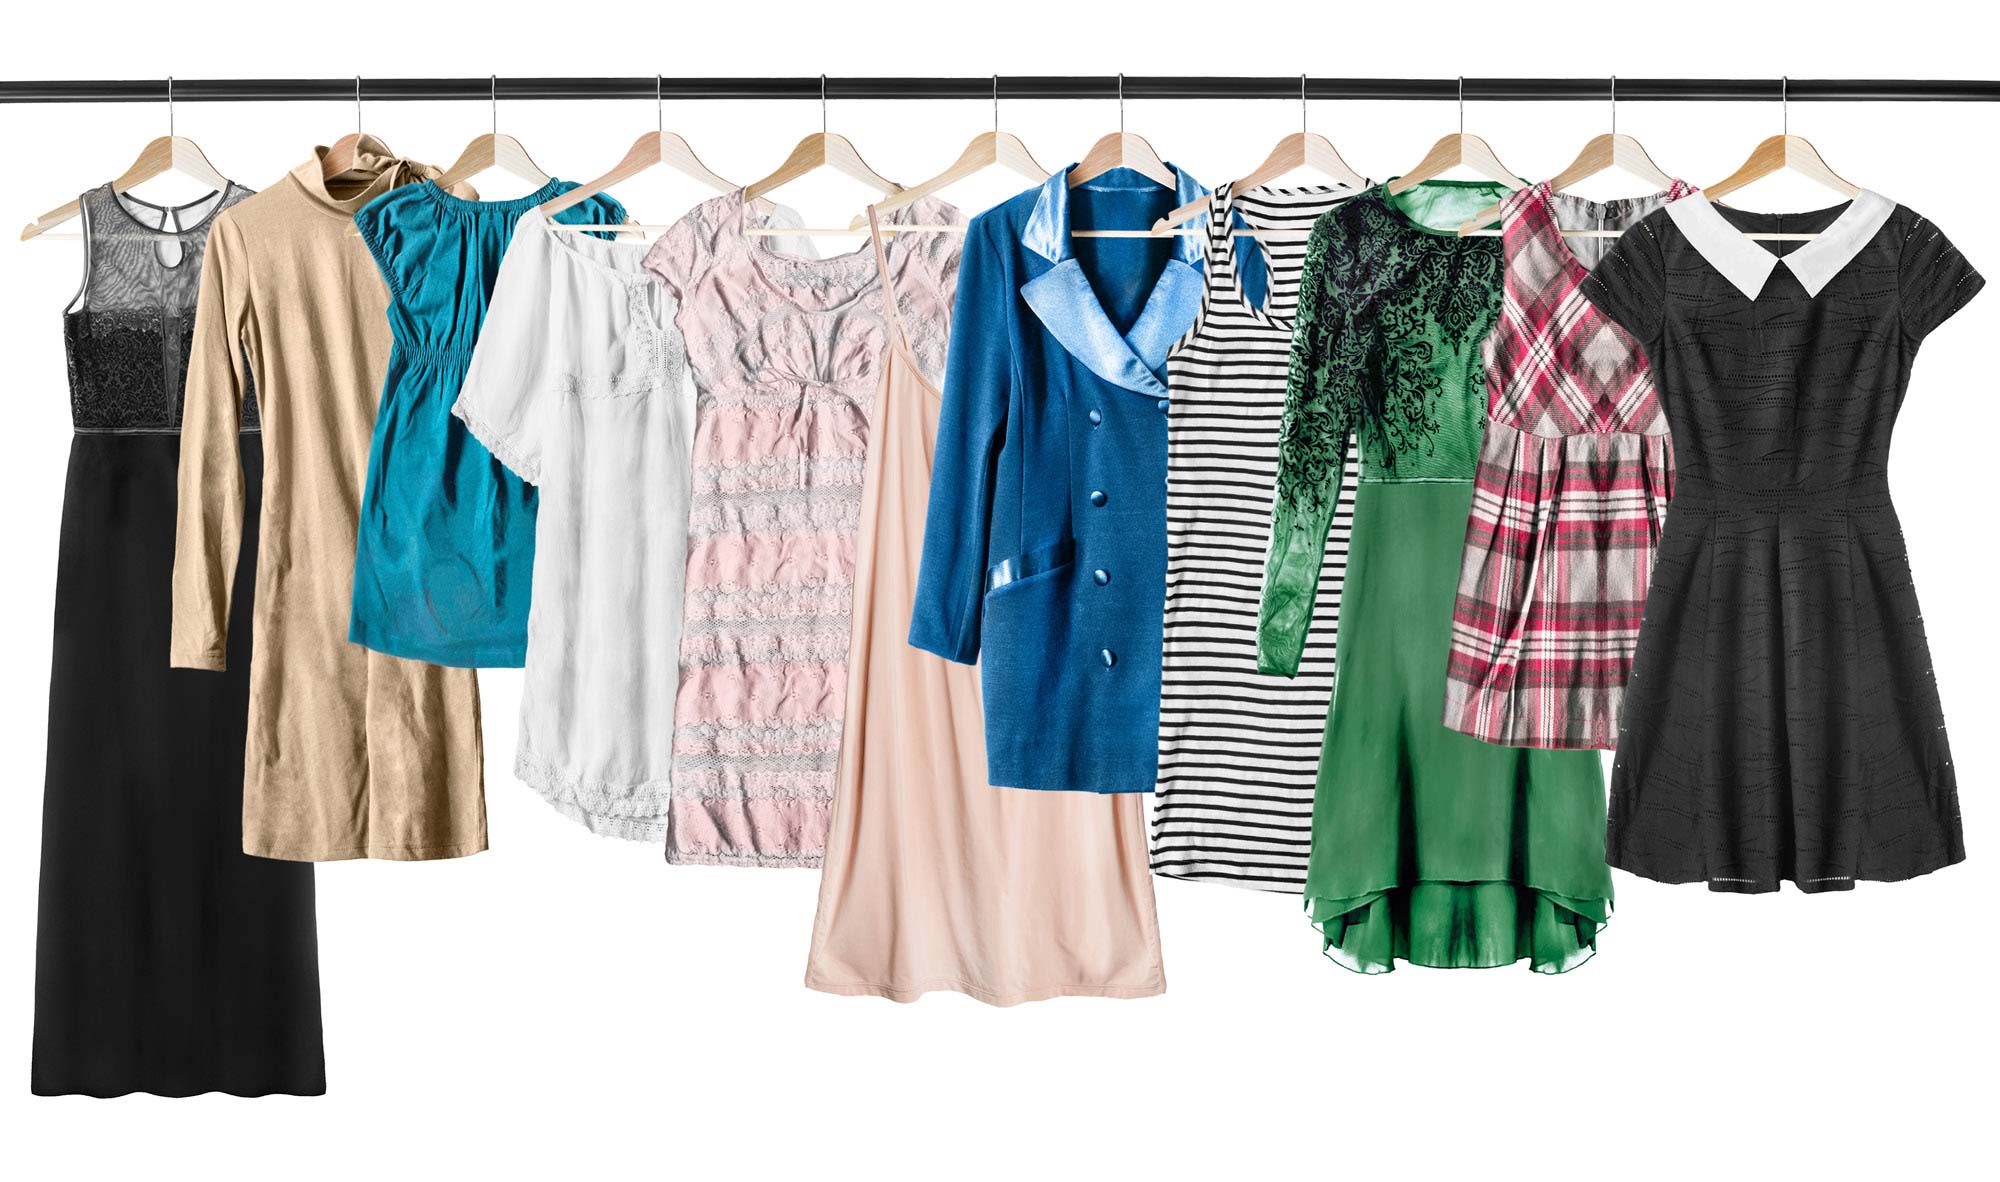 Eleven items of clothing, including dresses, shirts, and a coat, hanging on hangers.